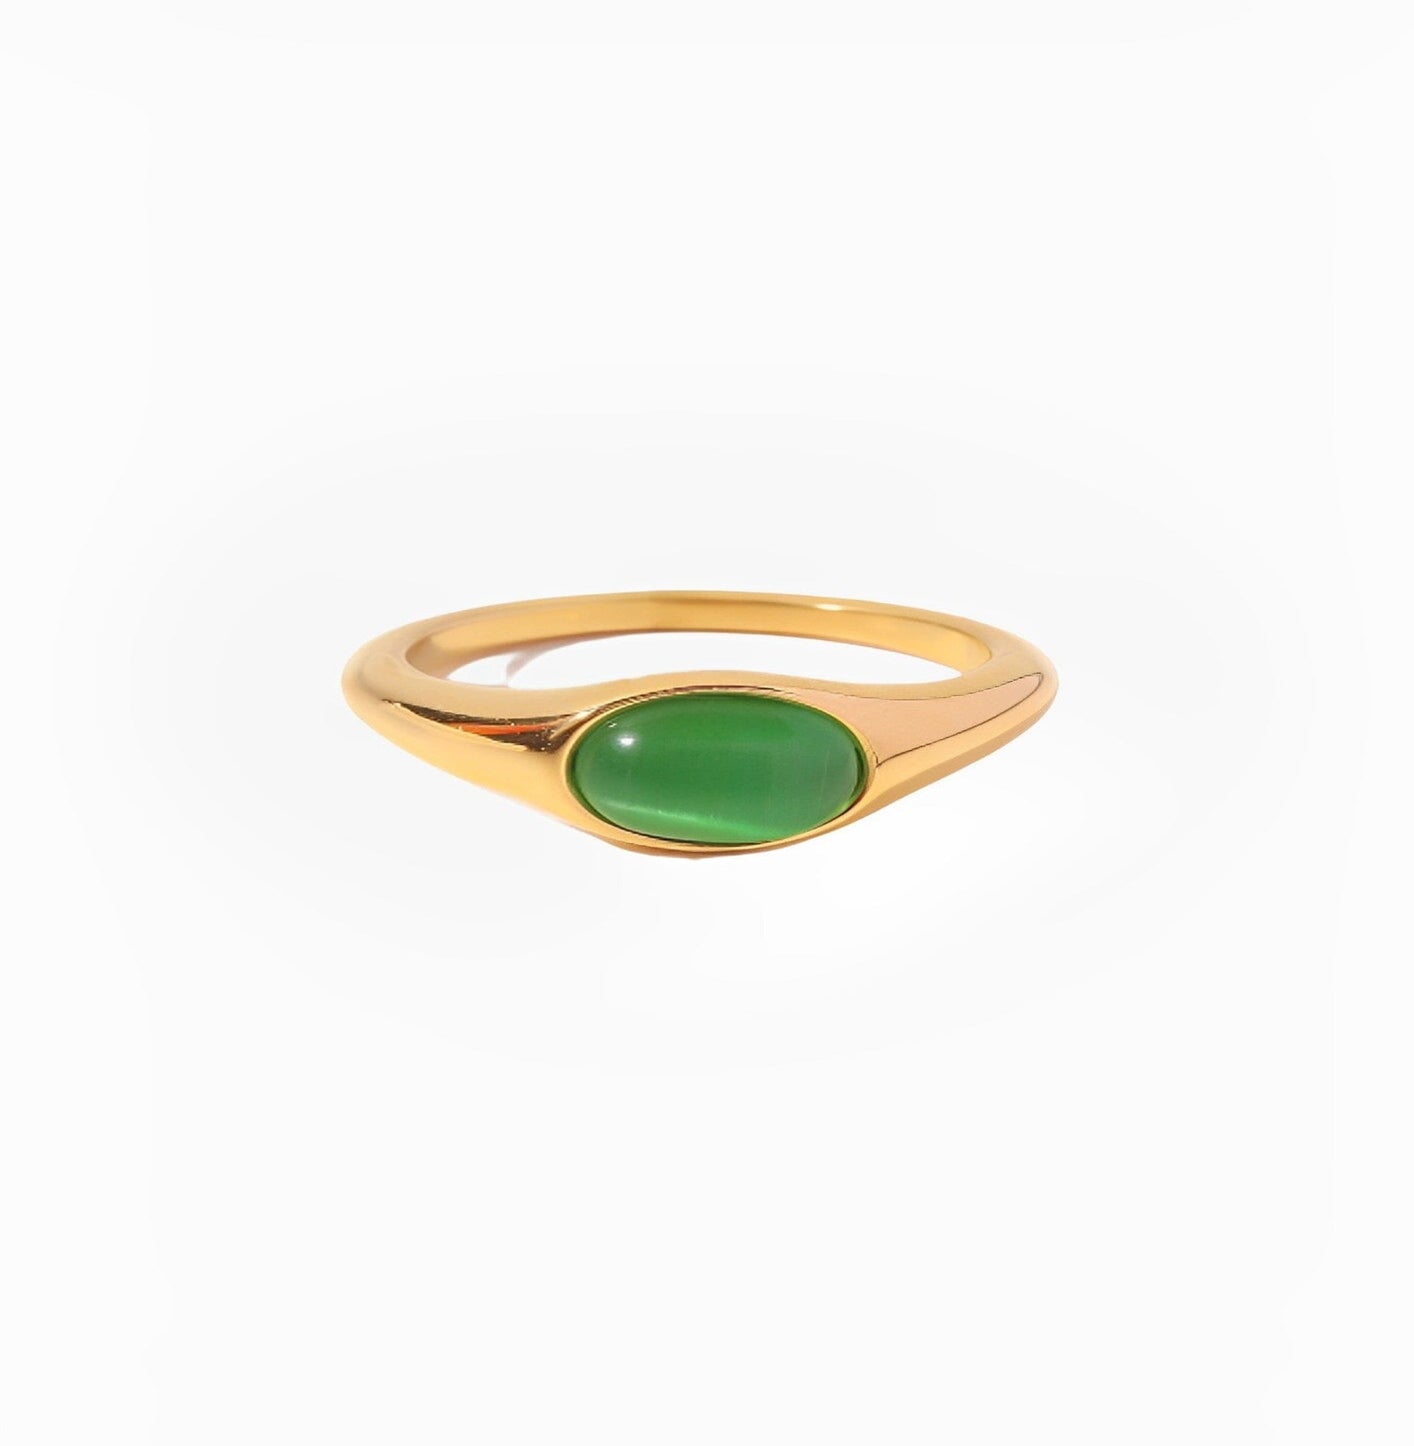 GREEN GEMSTONE RING ring Yubama Jewelry Online Store - The Elegant Designs of Gold and Silver ! 